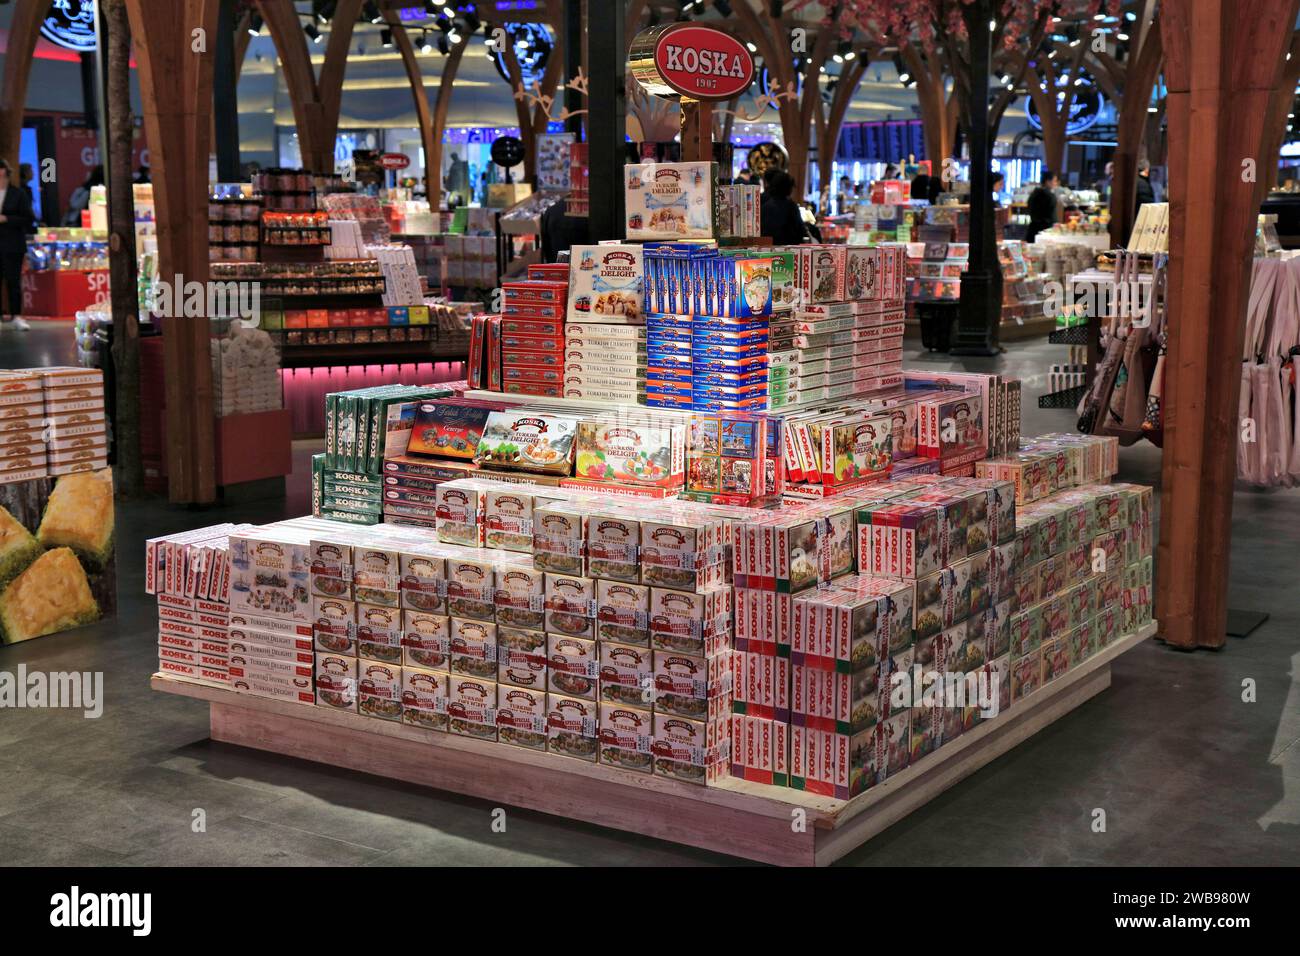 ISTANBUL, TURKEY - APRIL 11, 2023: Koska brand Turkish delight and halva in a duty free shop at Istanbul Airport, one of busiest airports in the world Stock Photo